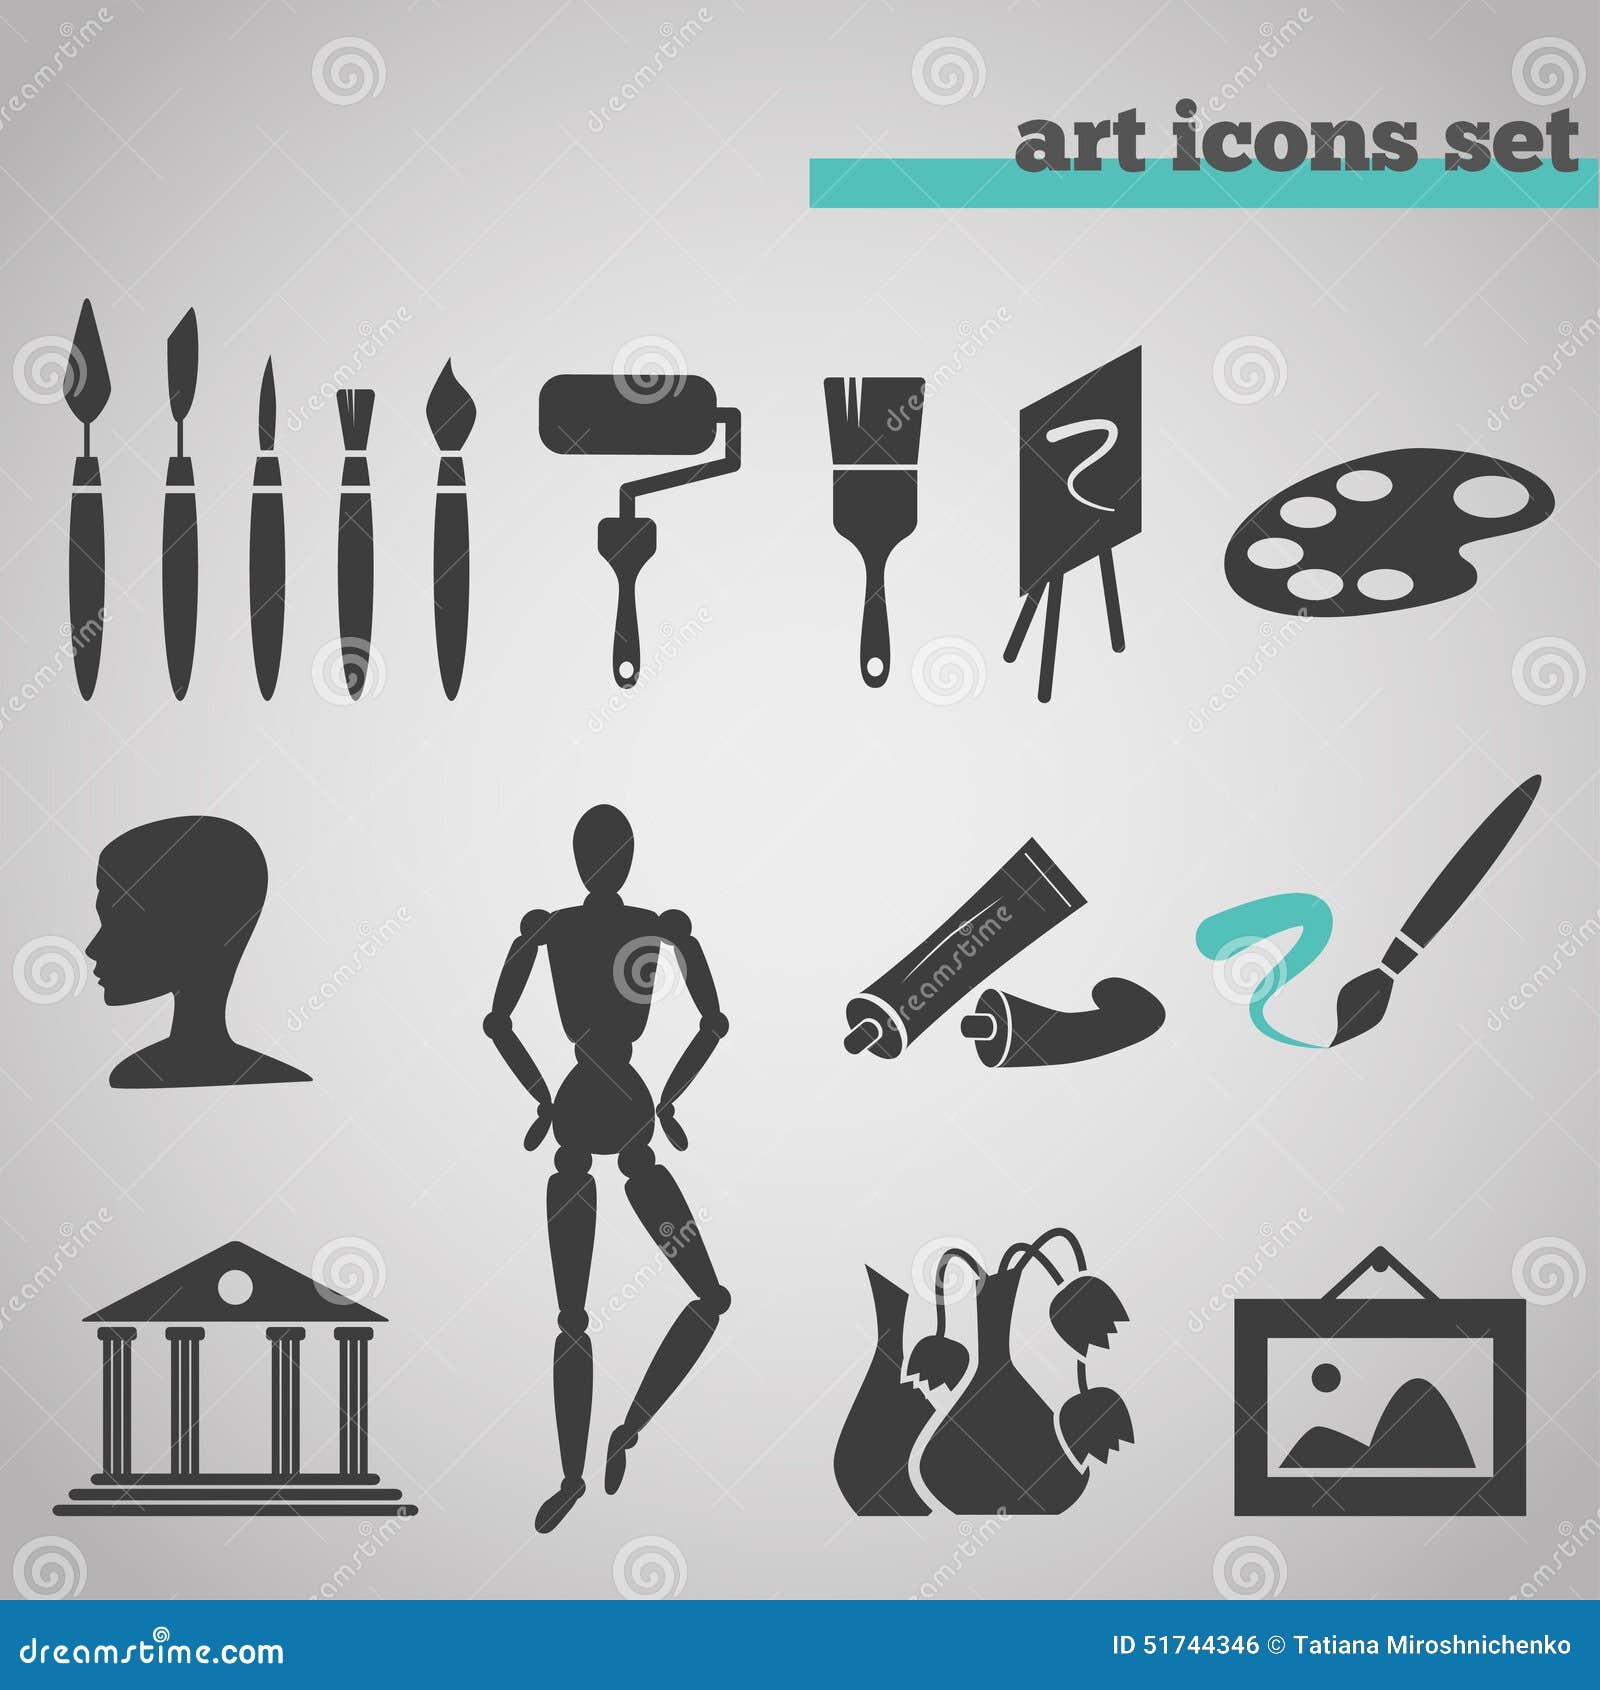 https://thumbs.dreamstime.com/z/icons-set-art-supplies-painting-vector-illustration-instruments-drawing-sketching-isolated-grey-background-51744346.jpg